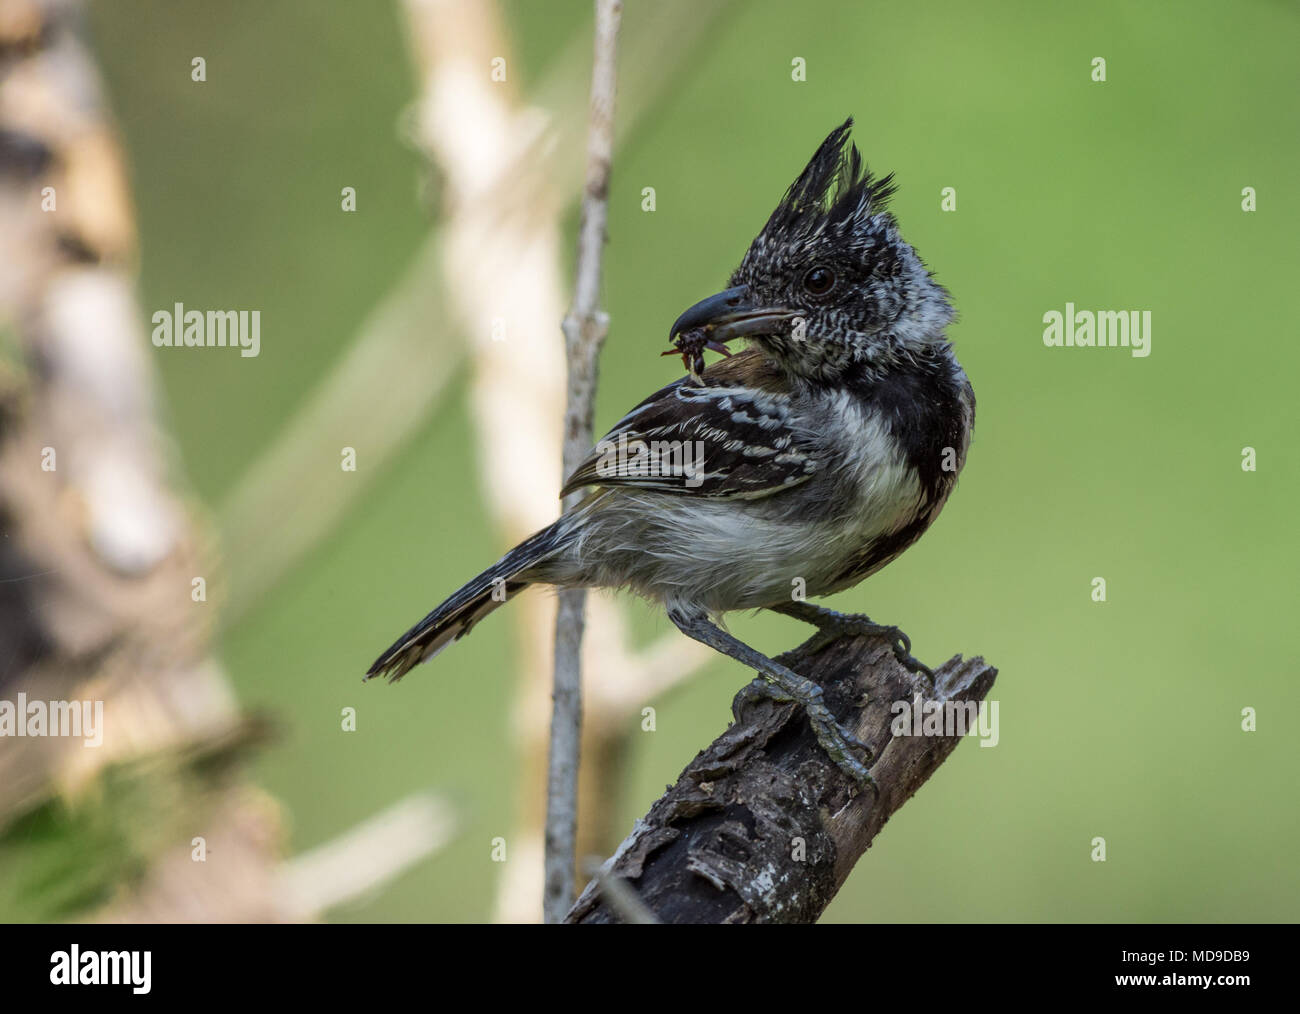 A male Black-crested Antshrike (Sakesphorus canadensis) with a bug in its beak. Colombia, South America. Stock Photo